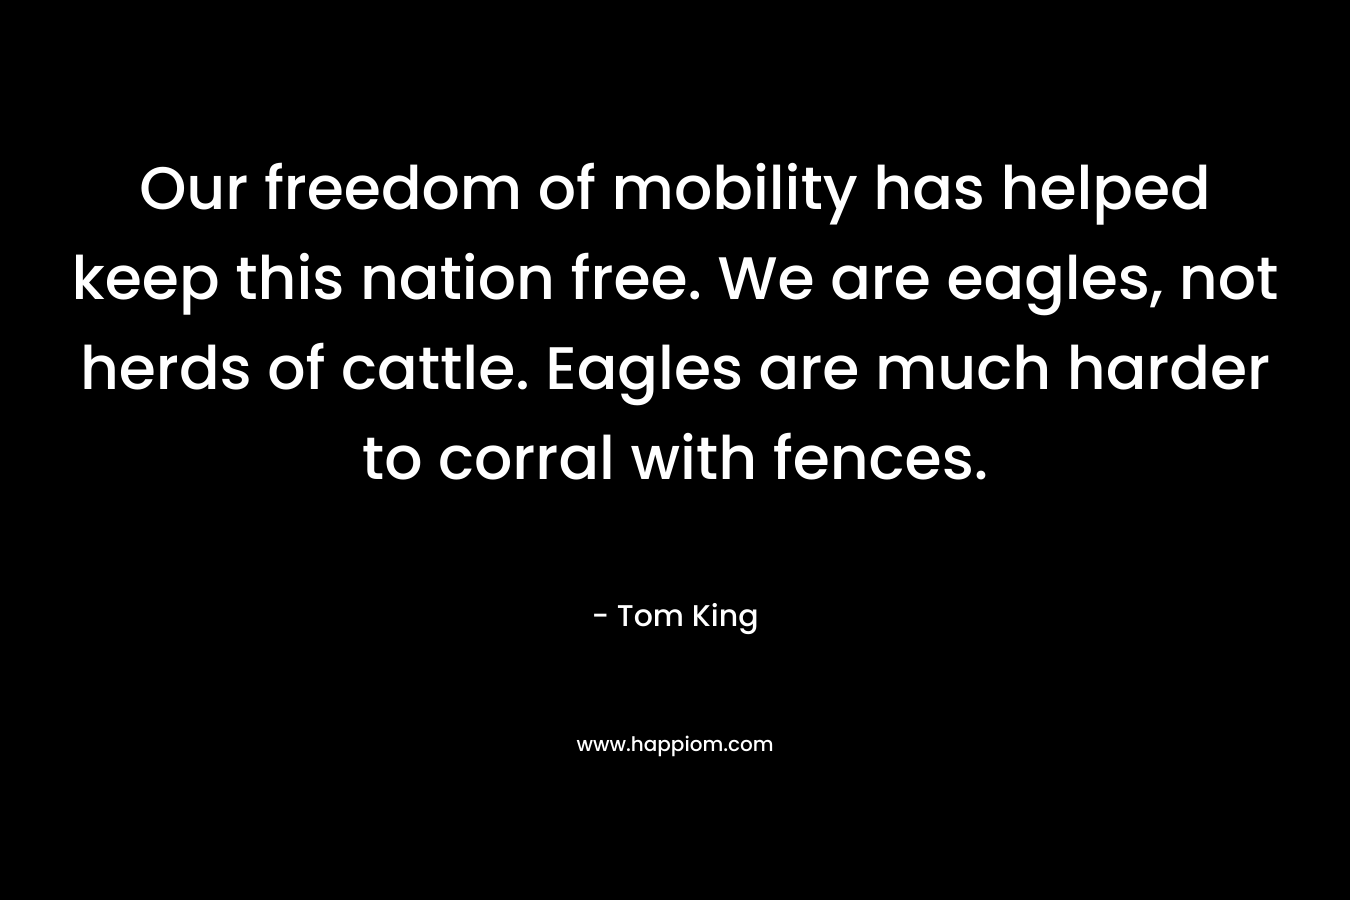 Our freedom of mobility has helped keep this nation free. We are eagles, not herds of cattle. Eagles are much harder to corral with fences.